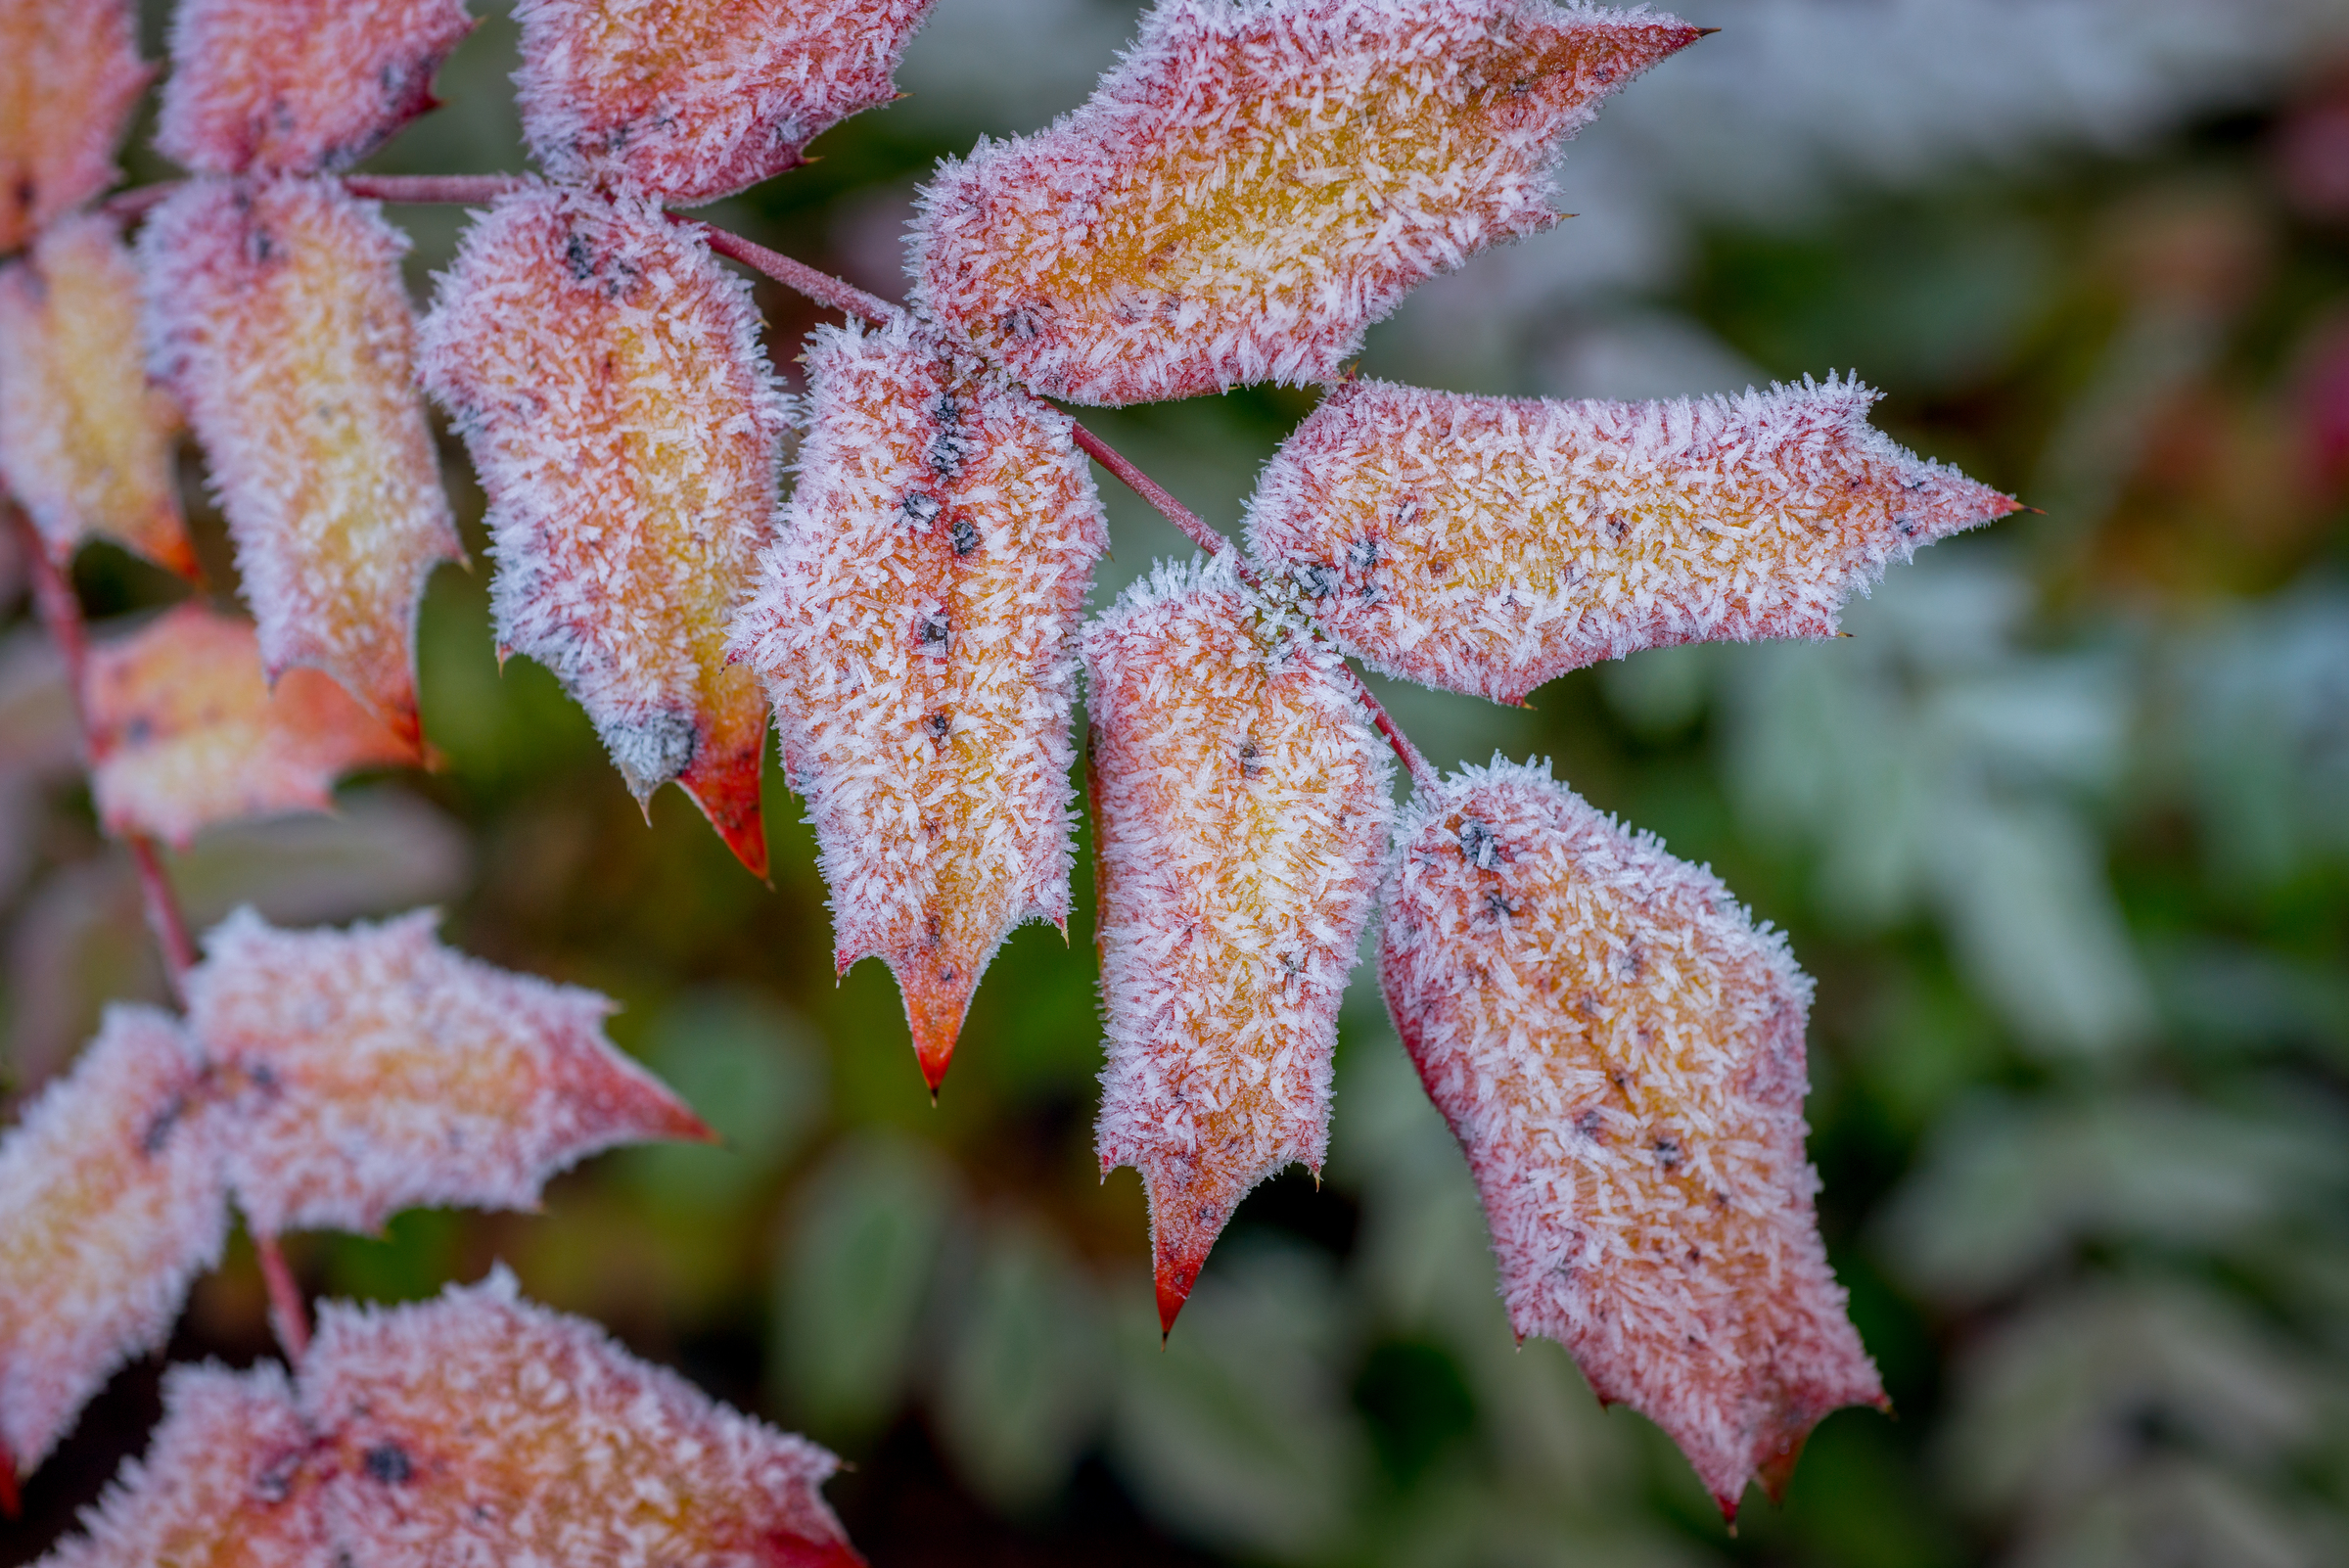 Frost on red and dark orange leaves